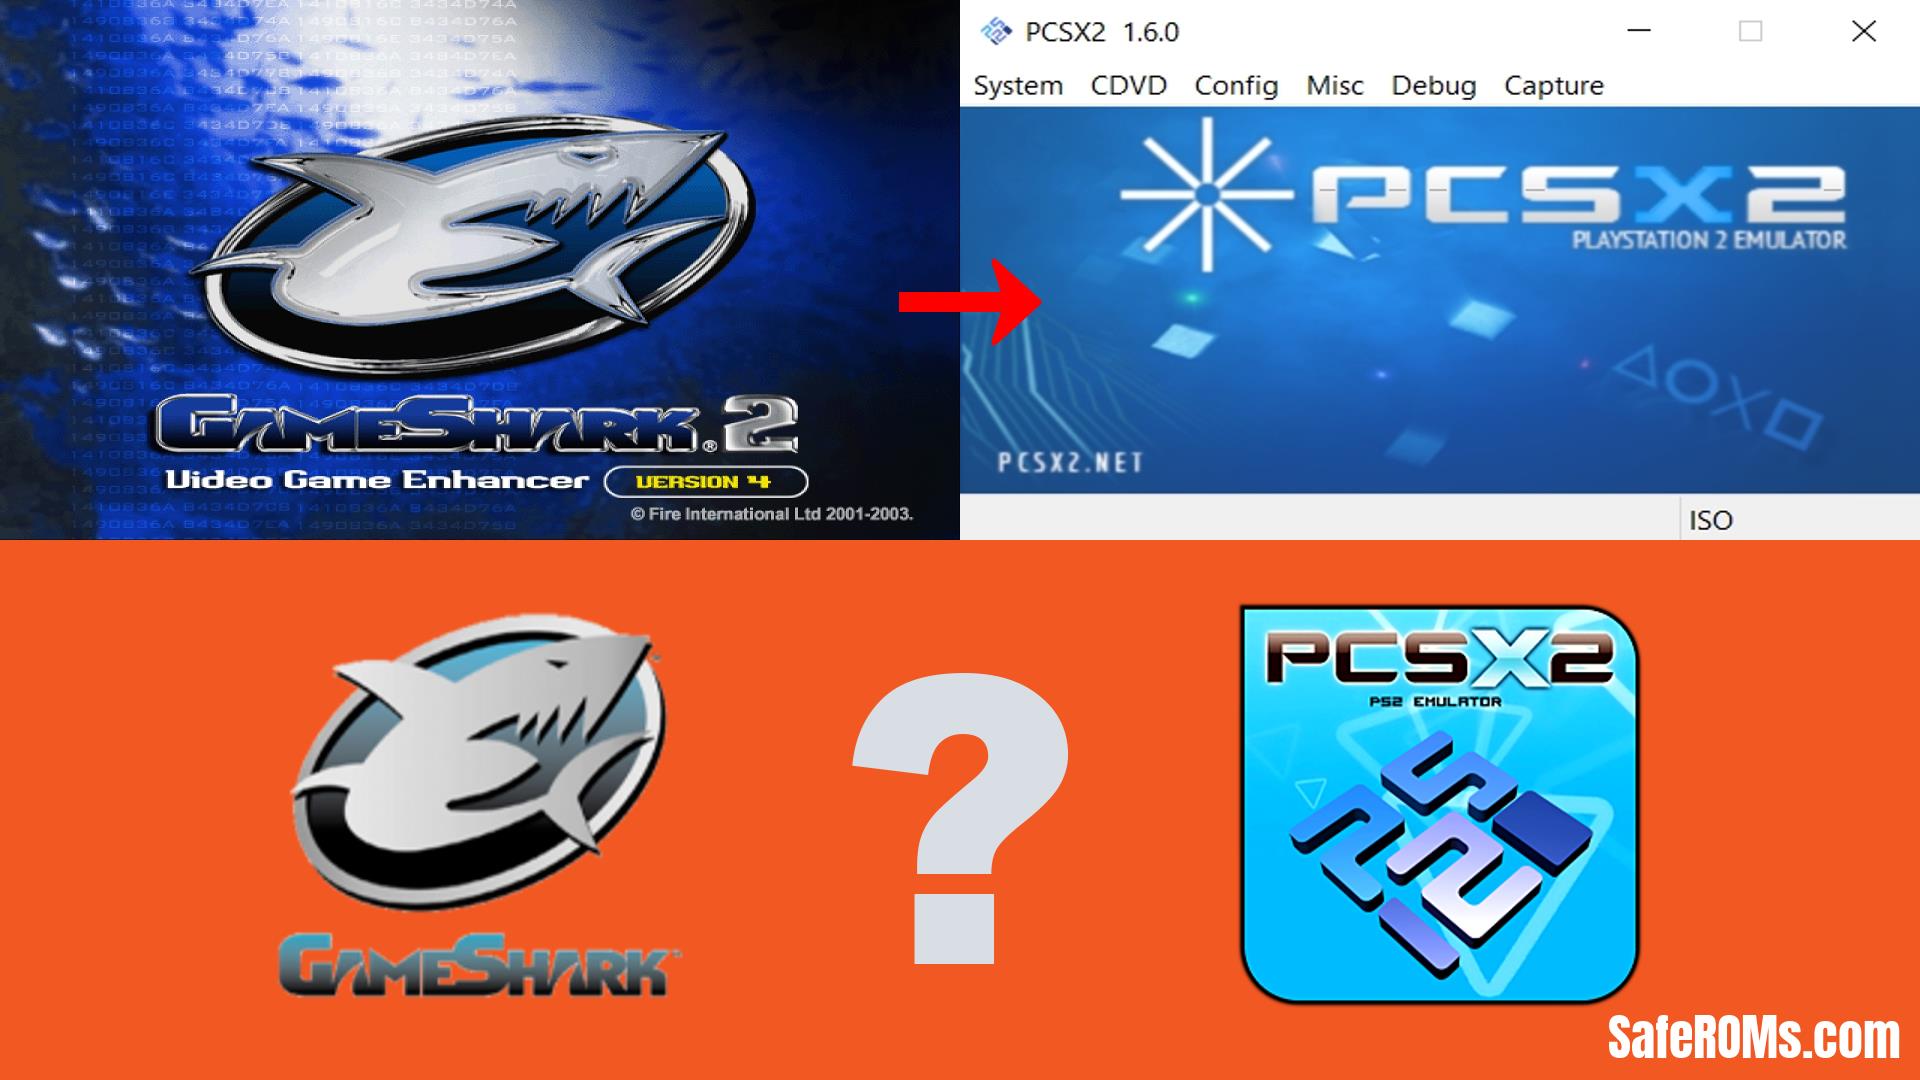 Cheat and Gameshark on PCSX2 